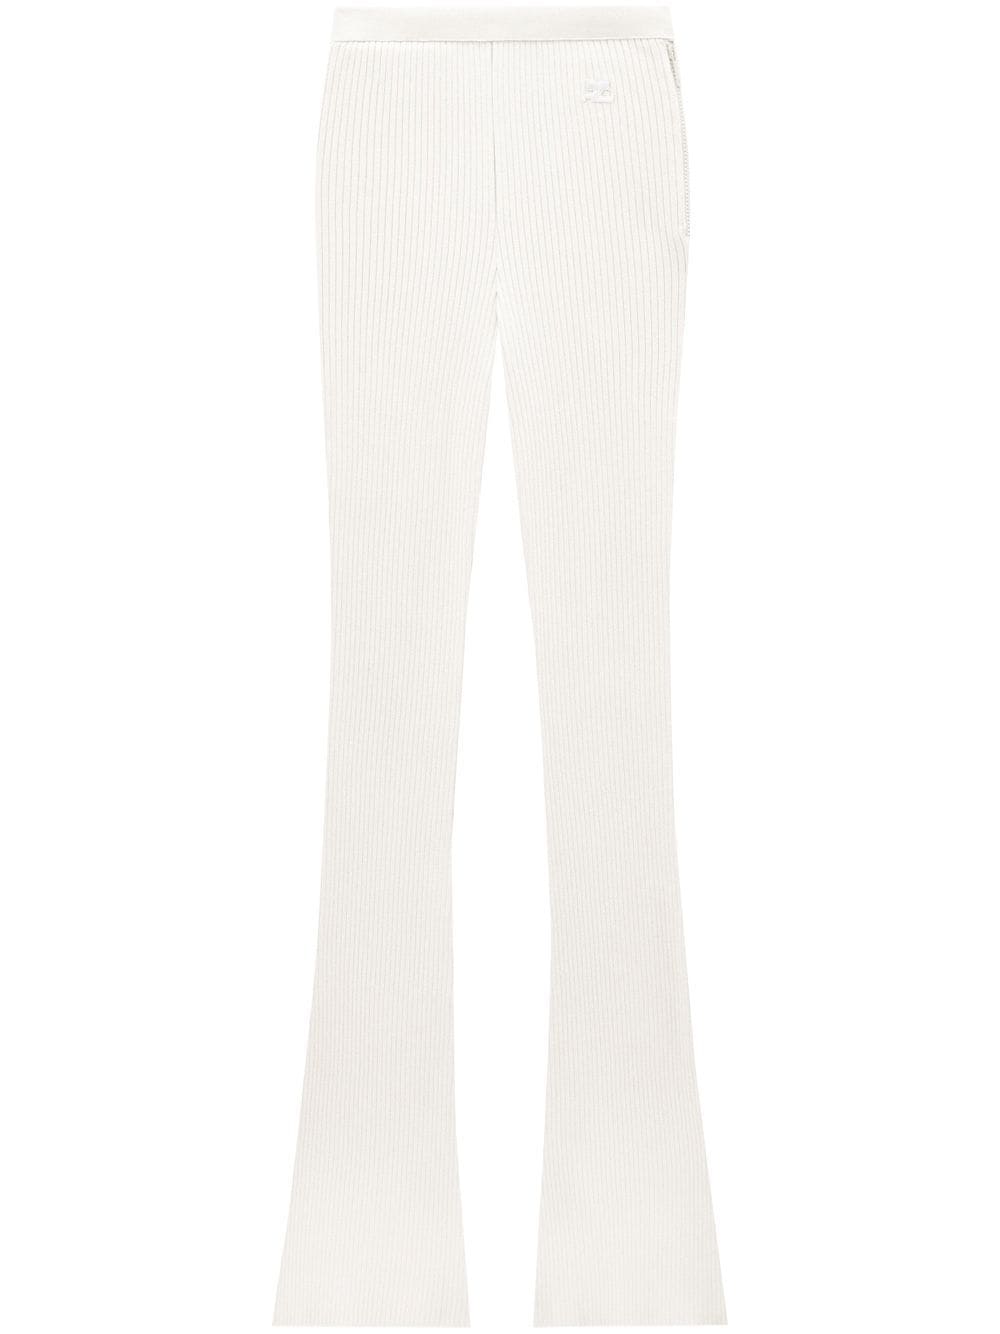 Courrèges ribbed-knit flared trousers - White von Courrèges